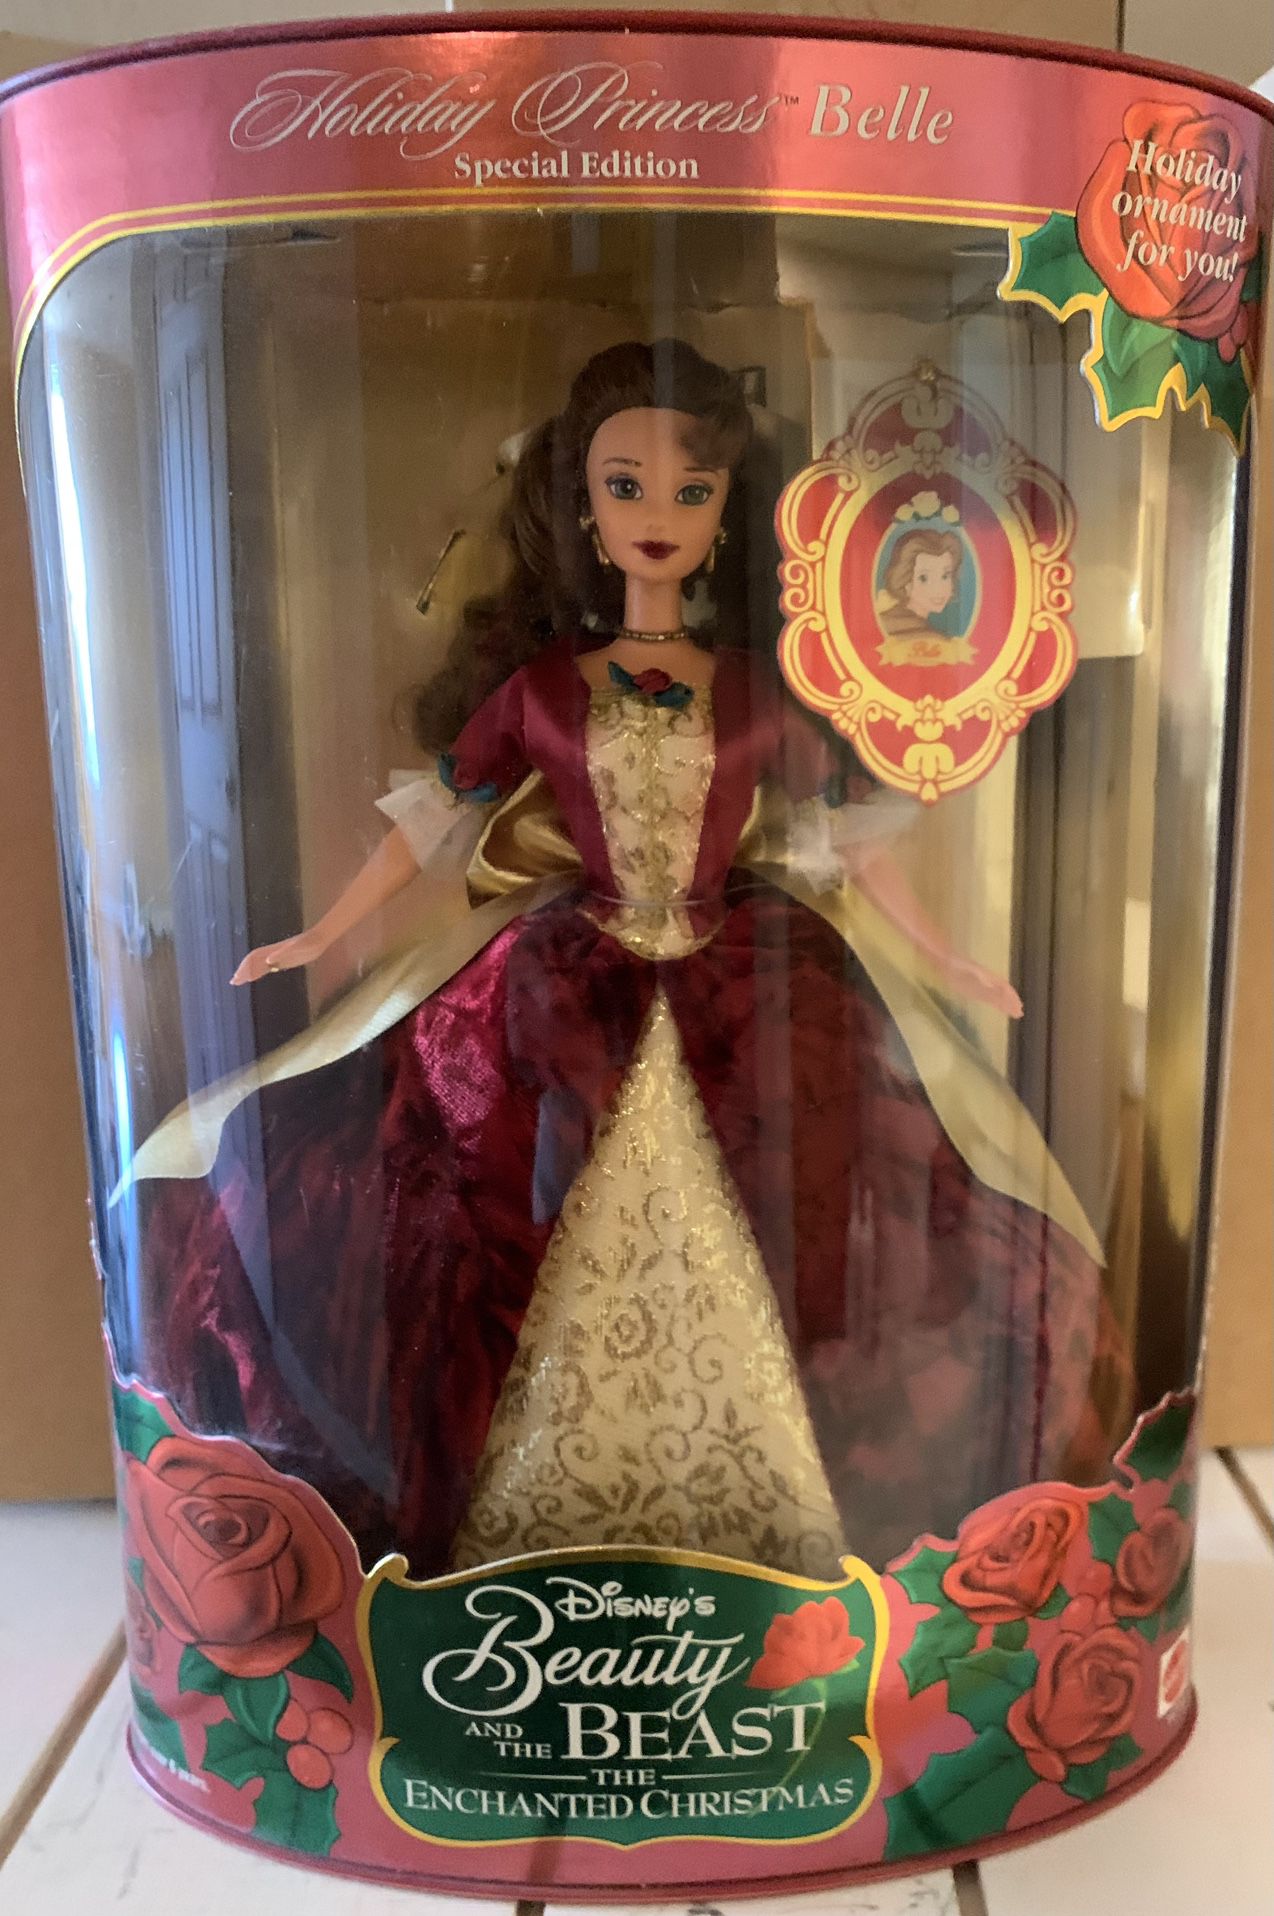 Holiday Princess Belle Special Edition Barbie